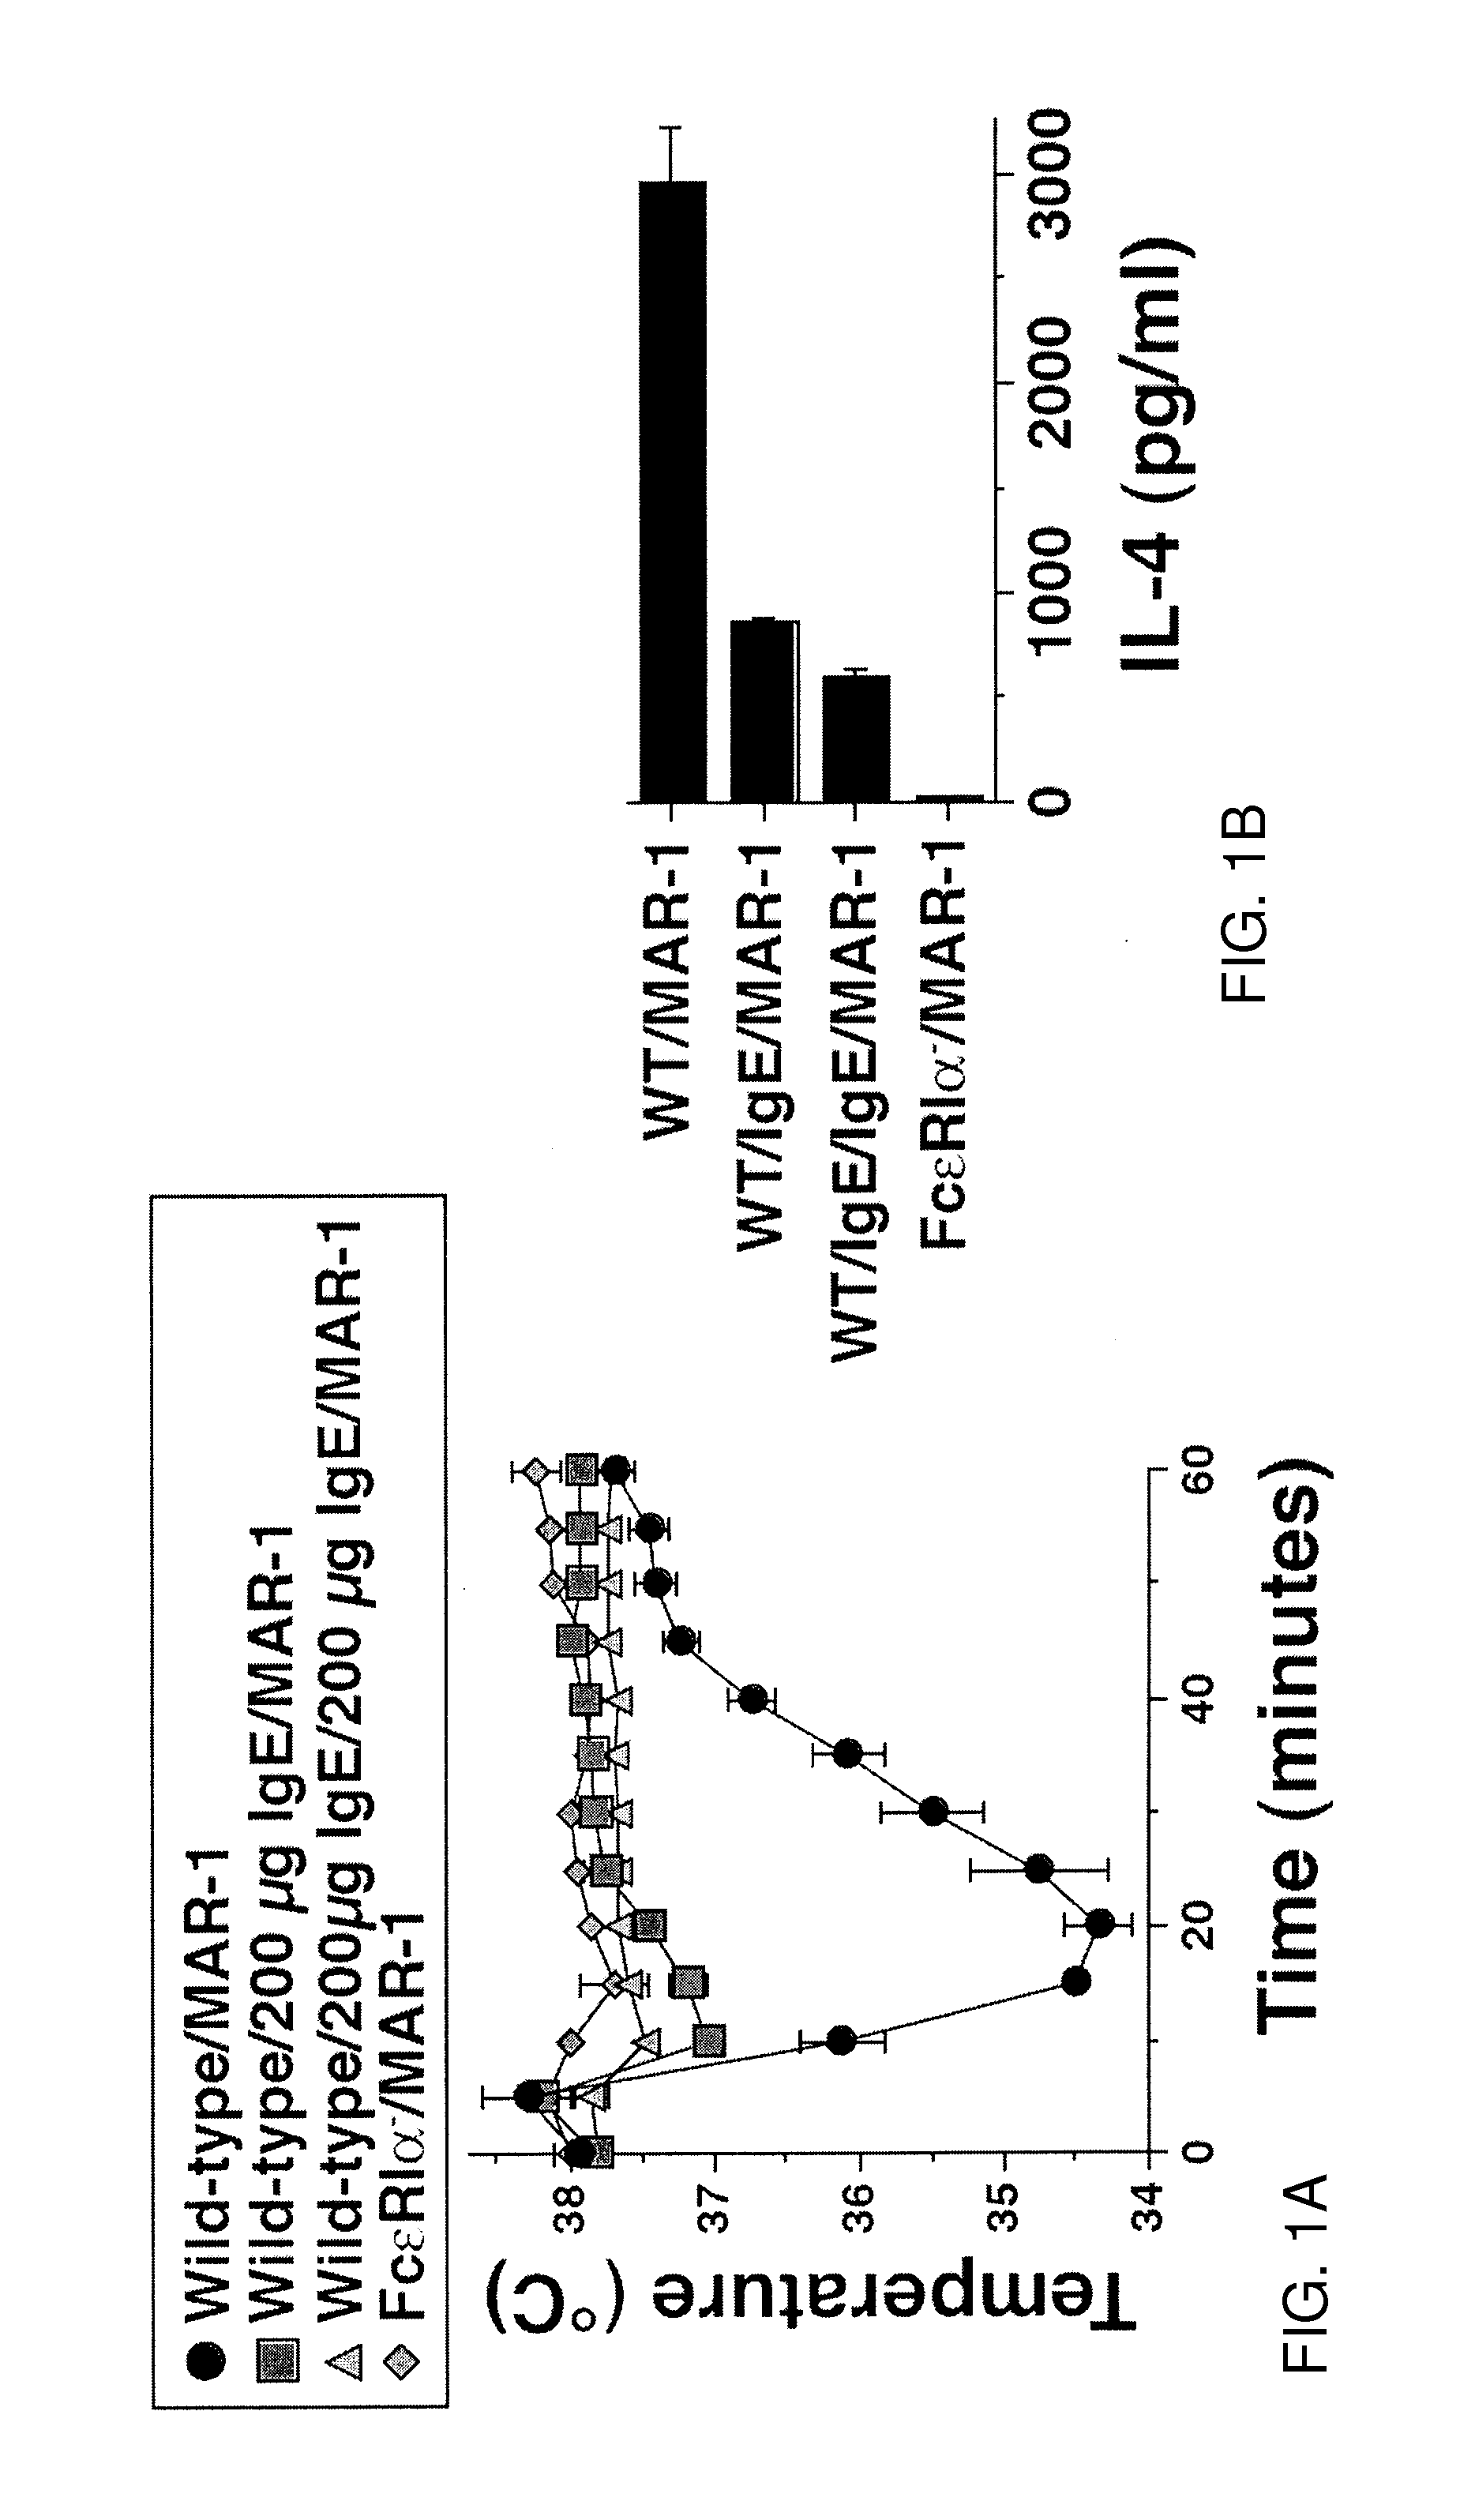 Methods for suppressing allergic reactions